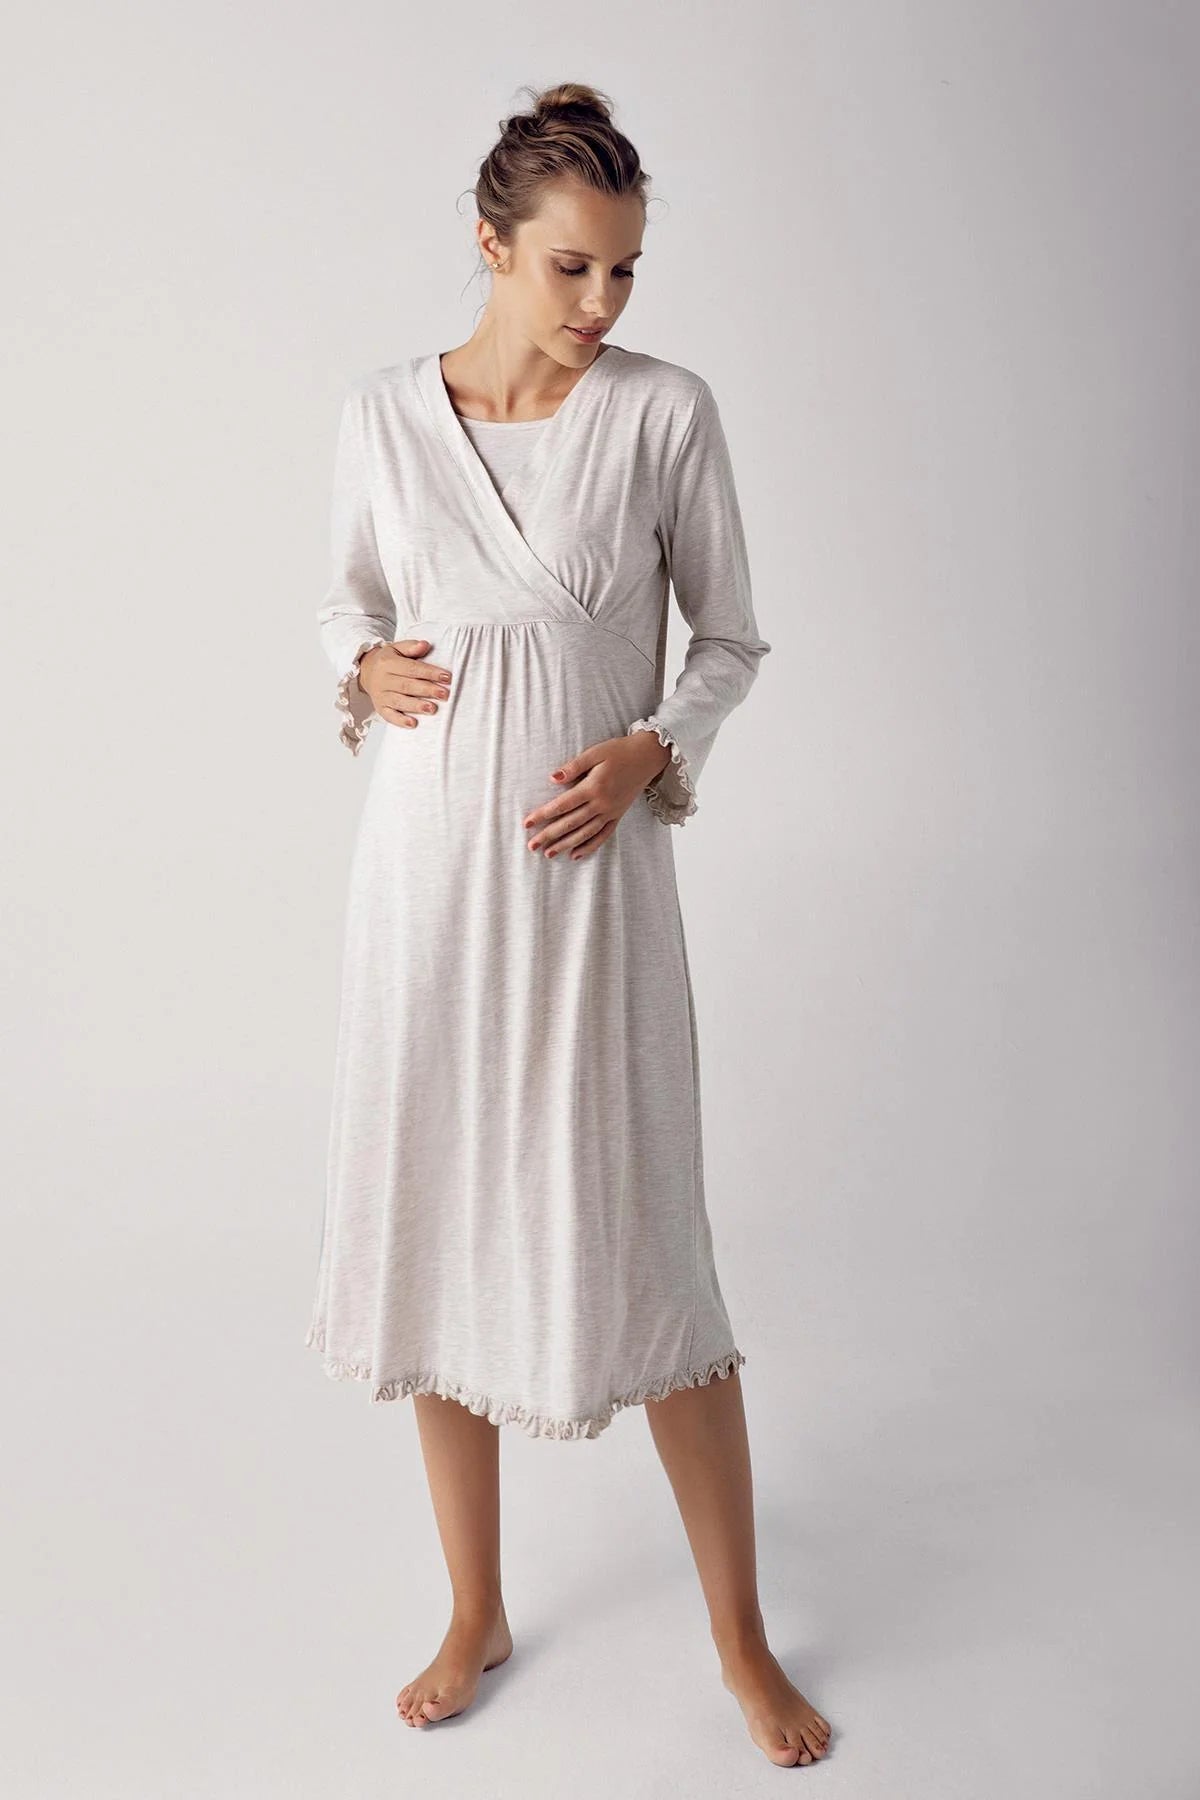 Shopymommy 13112 Double Breasted Maternity & Nursing Nightgown Beige